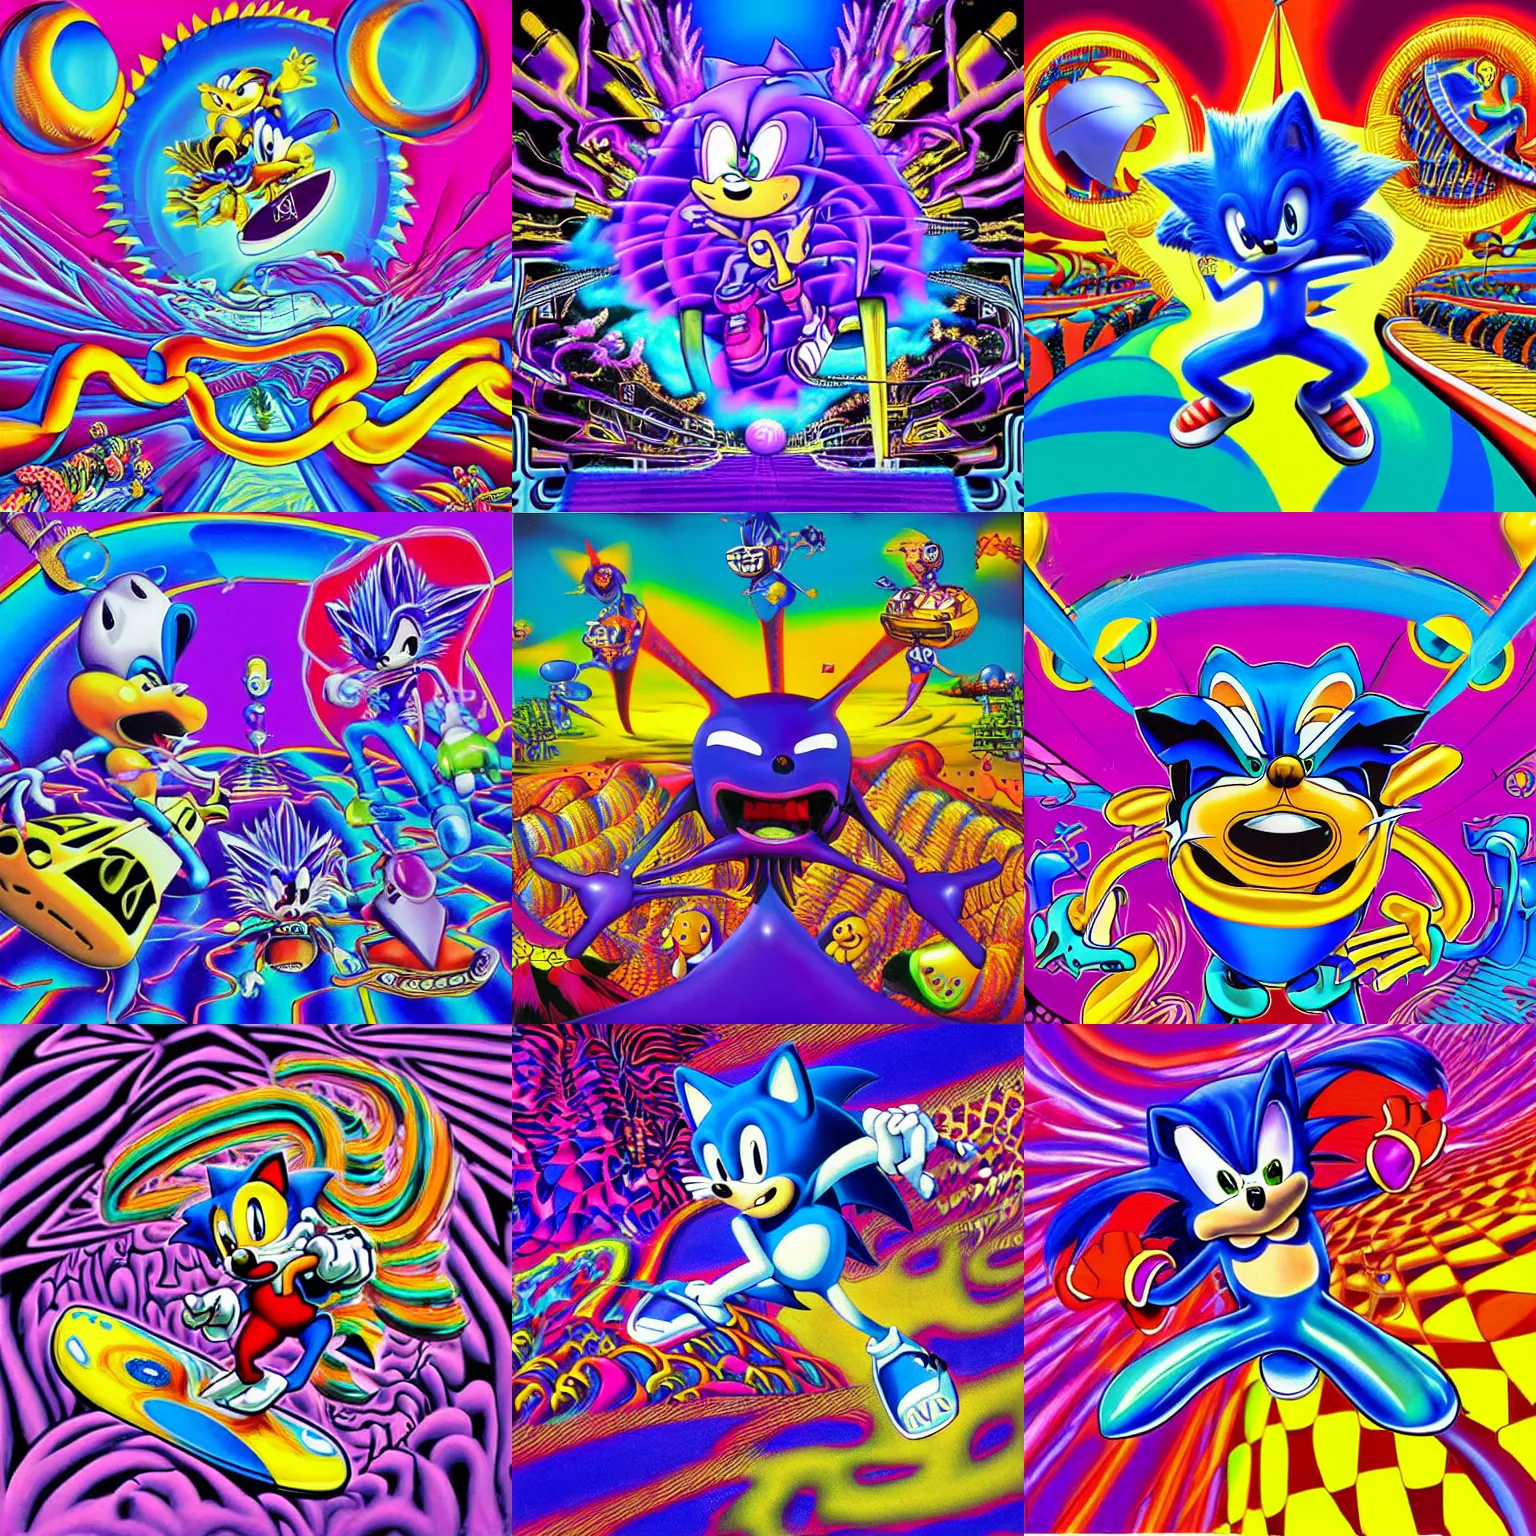 Prompt: surreal, sharp, lowbrow, detailed professional, high quality airbrush art mgmt album cover of a liquid dissolving lsd dmt blue sonic the hedgehog airbrush art surfing through cyberspace, purple checkerboard background, 1 9 9 0 s 1 9 9 2 acid house techno sega genesis video game album cover